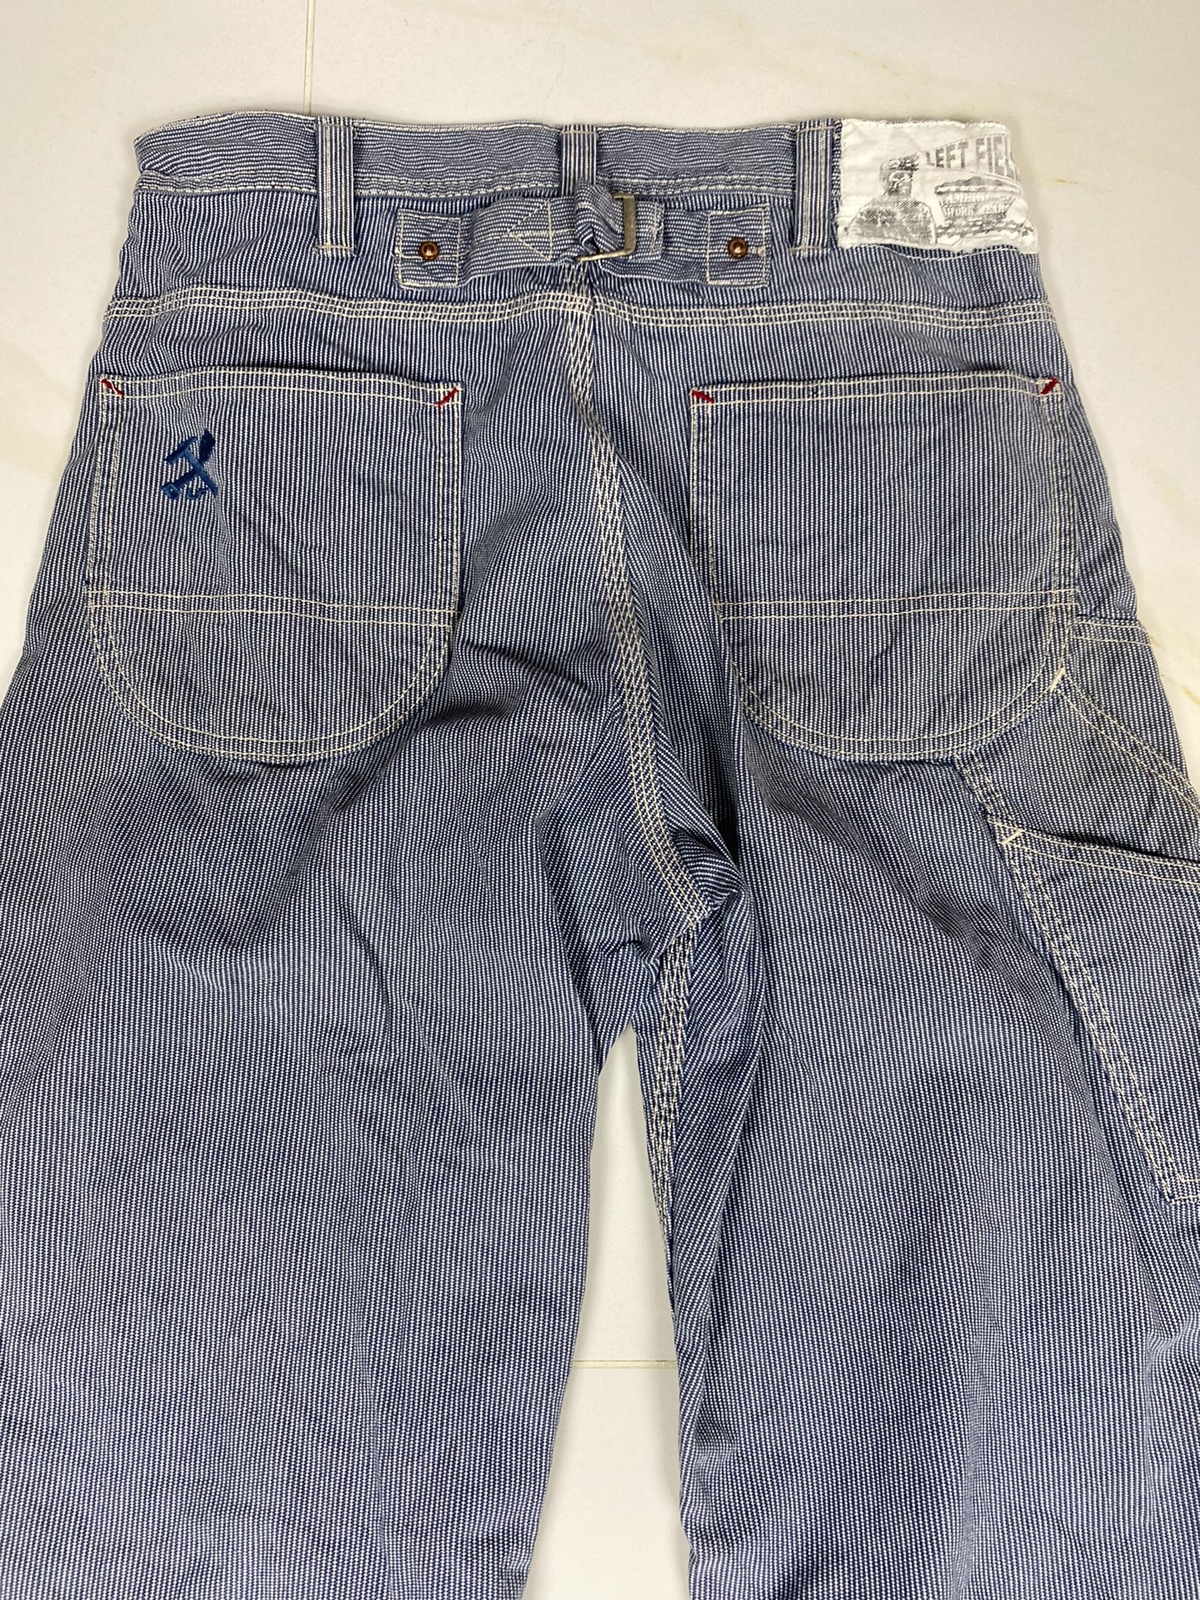 Left Field Nyc - Left Field Hickory Pants. S0111 - 11